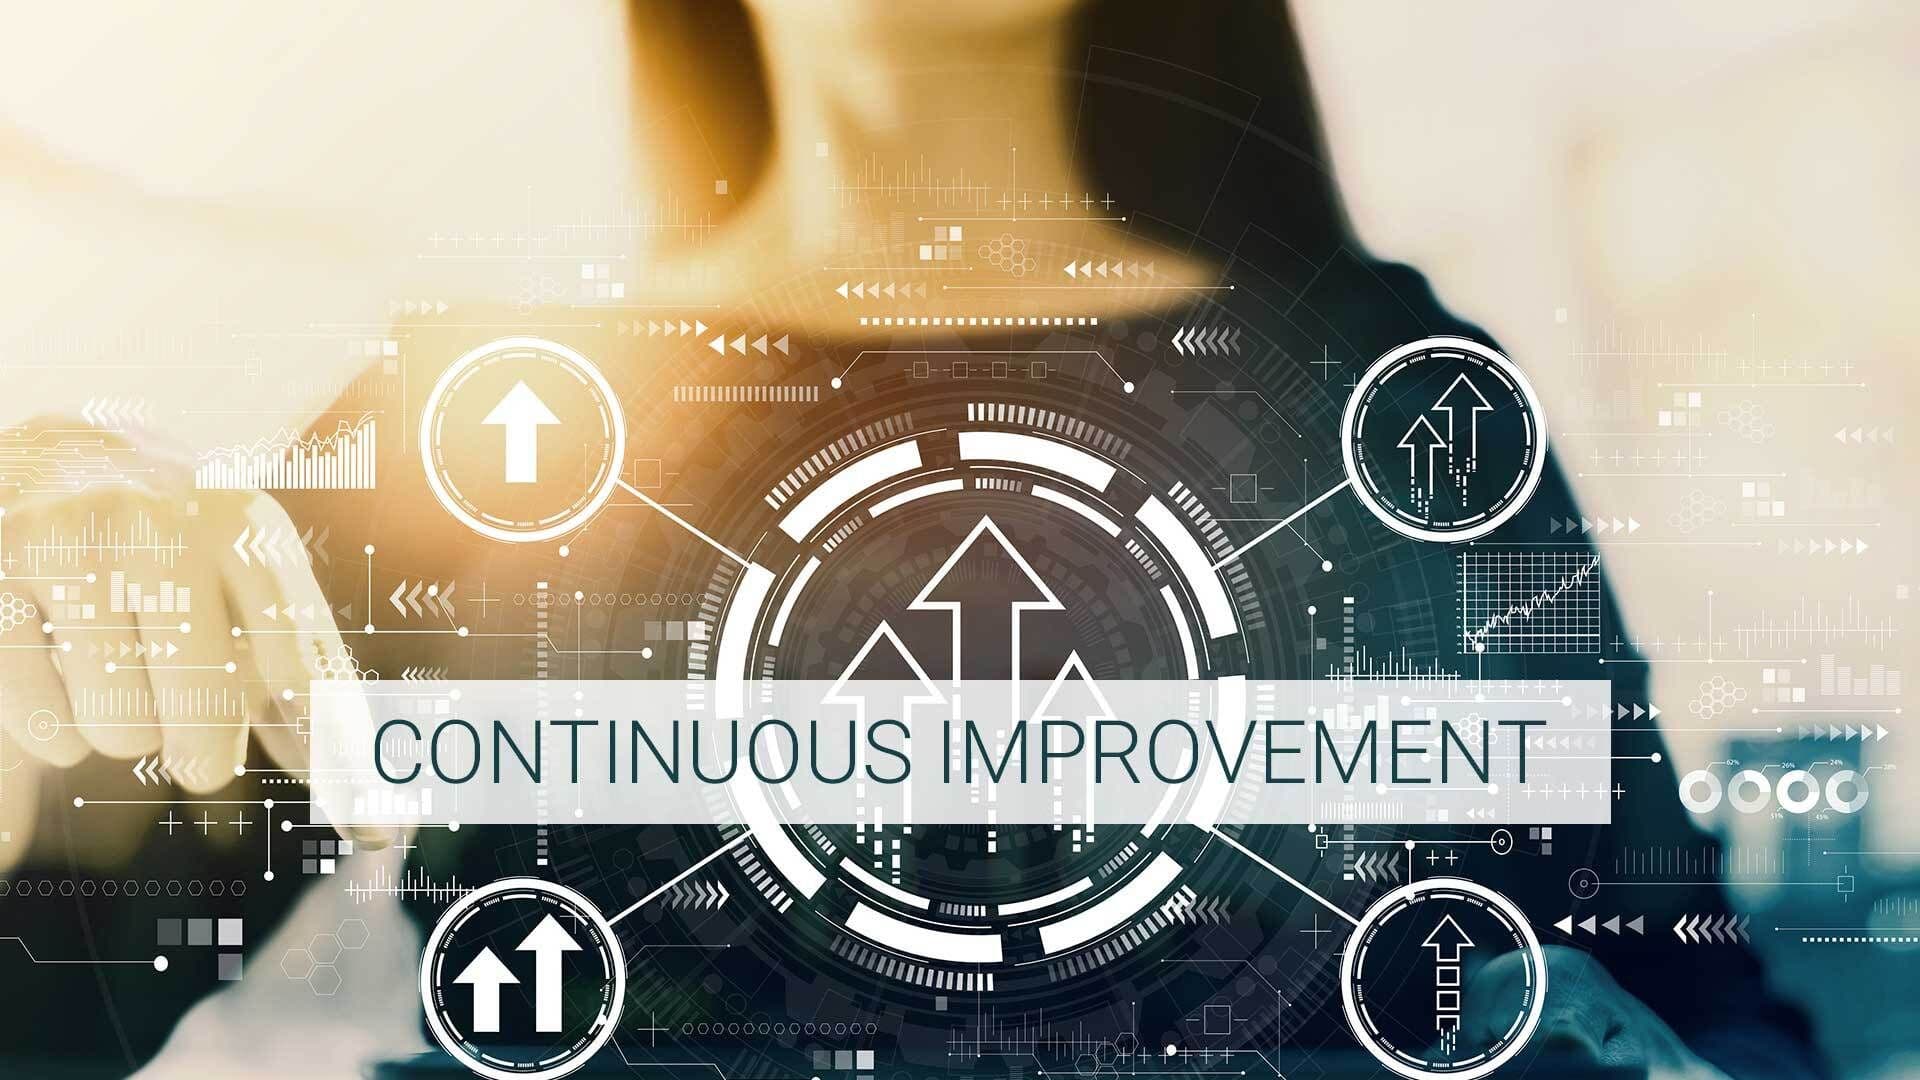 Continuous Improvement - A Corporate Culture to Implement